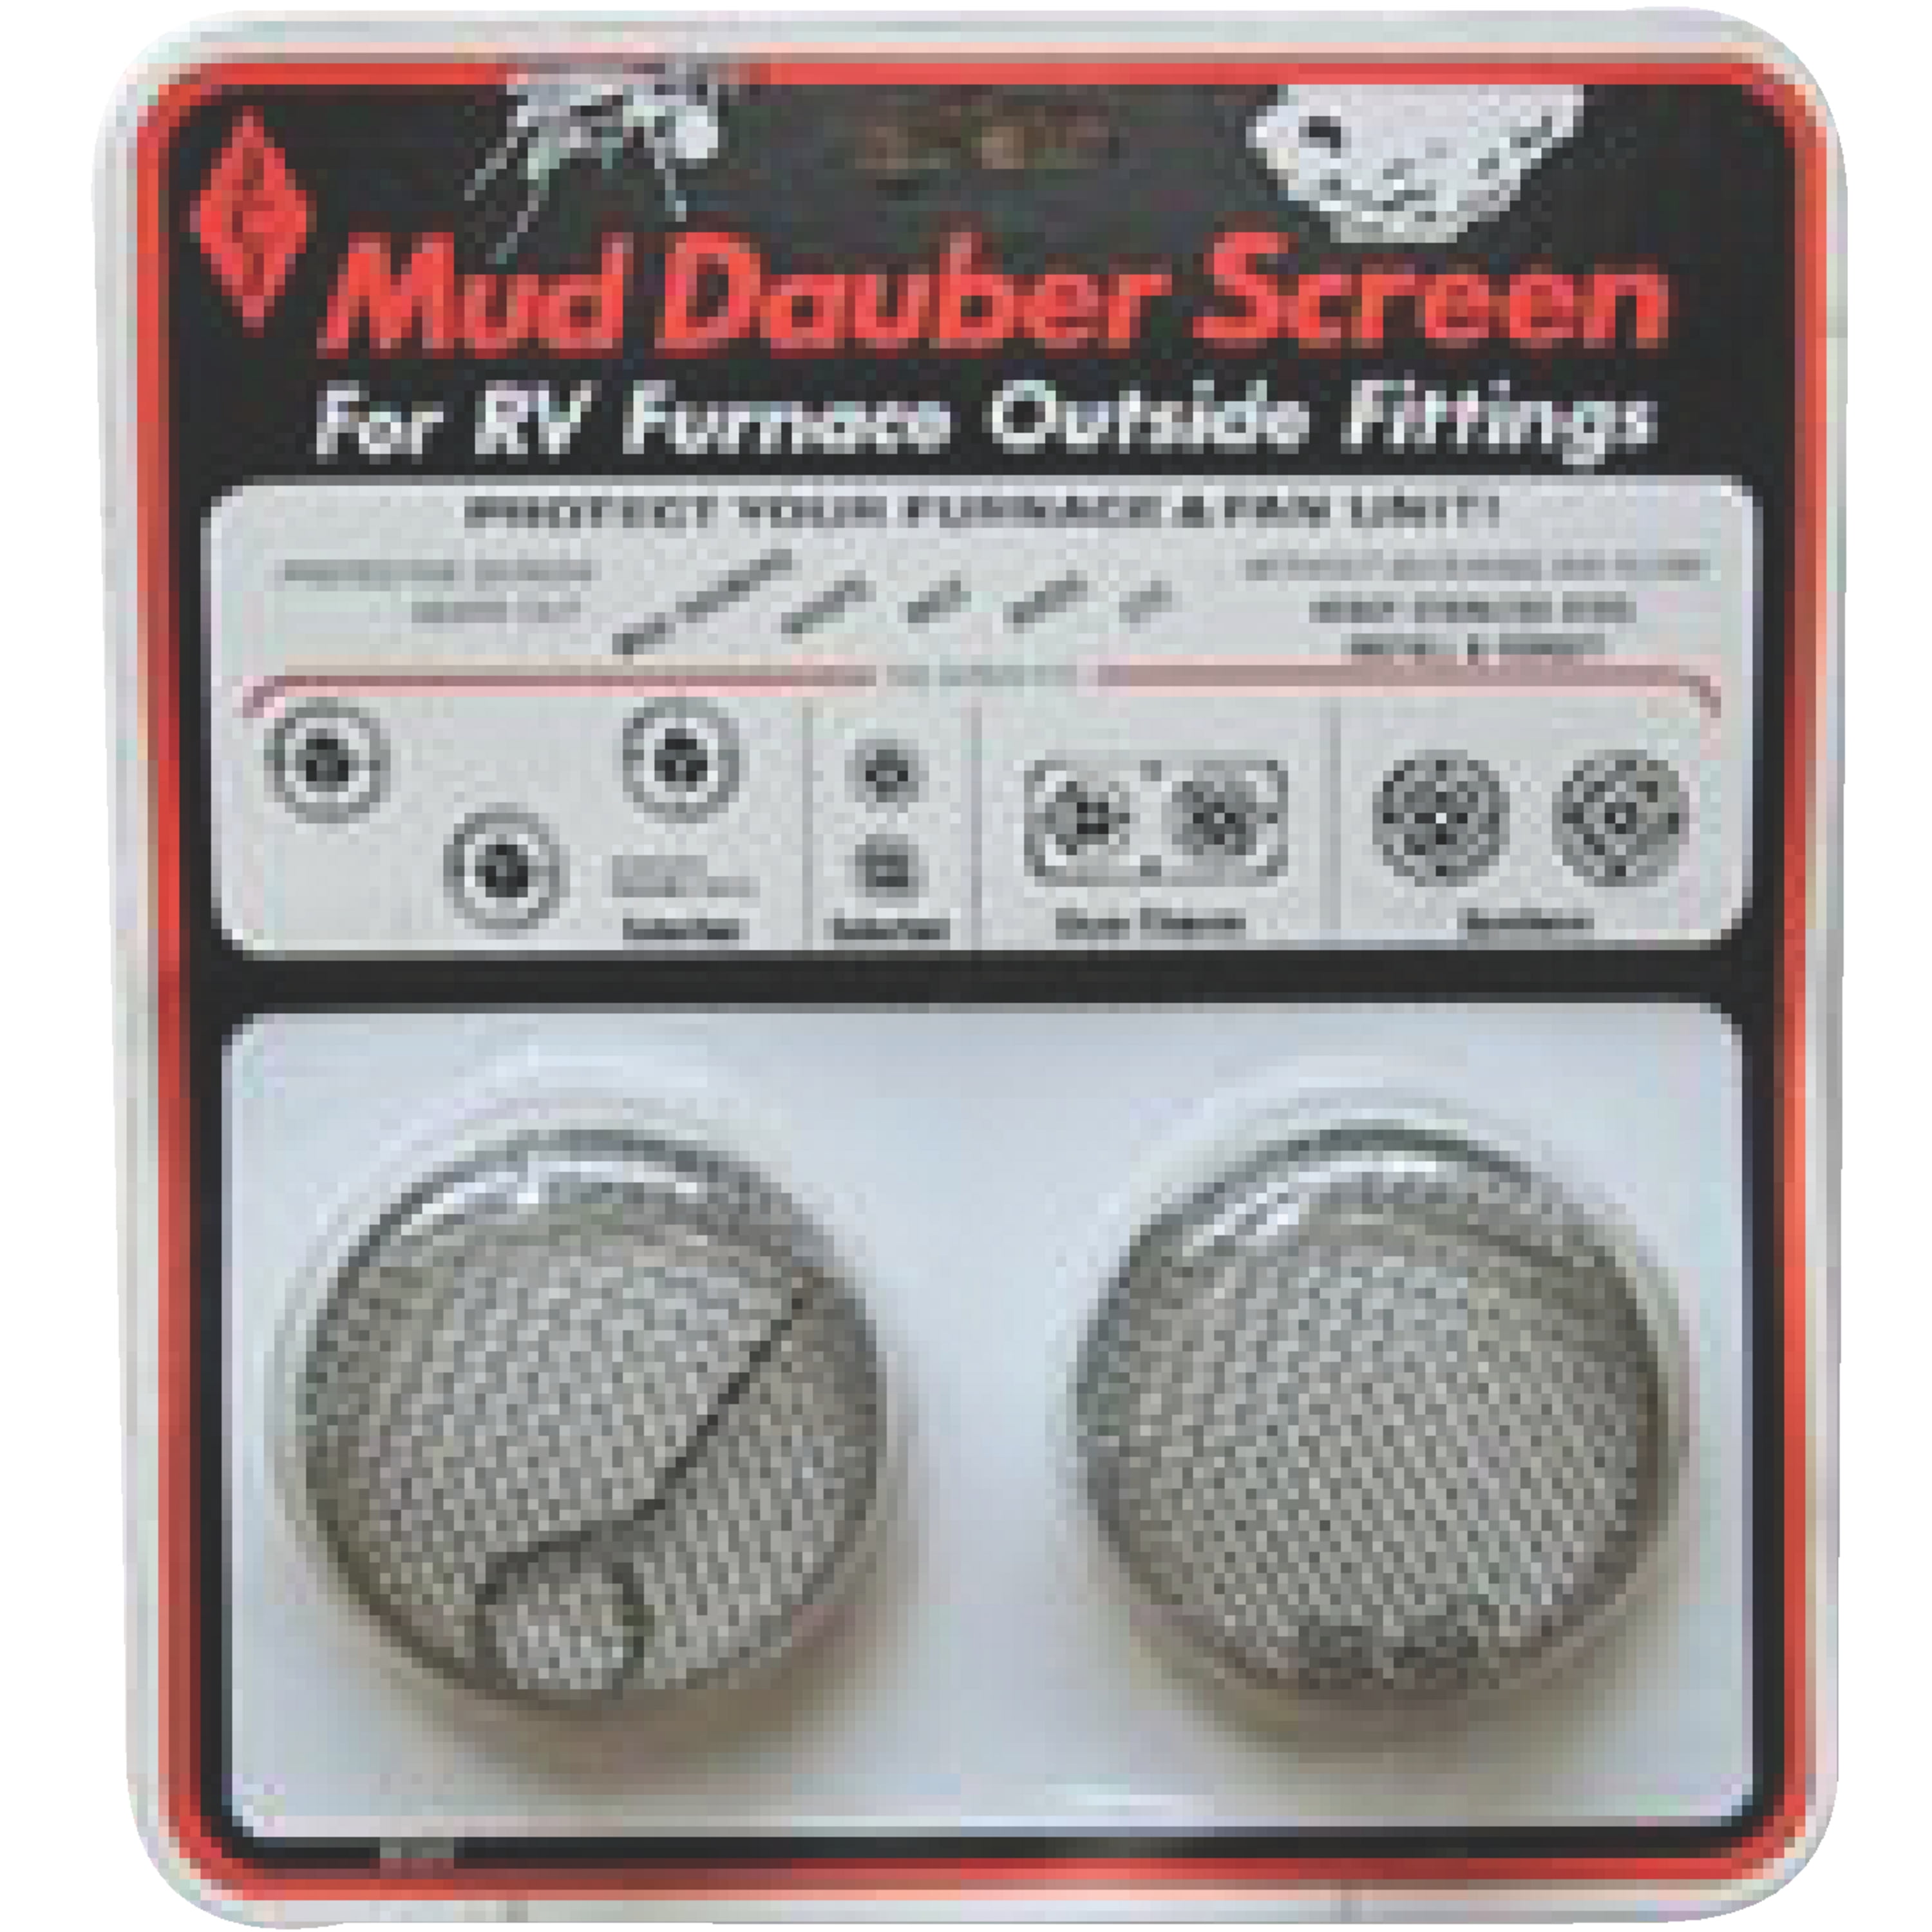 New in Package Details about   JCJ M-500 Mud Dauber Screen for RV Furnace Outside Fitting 